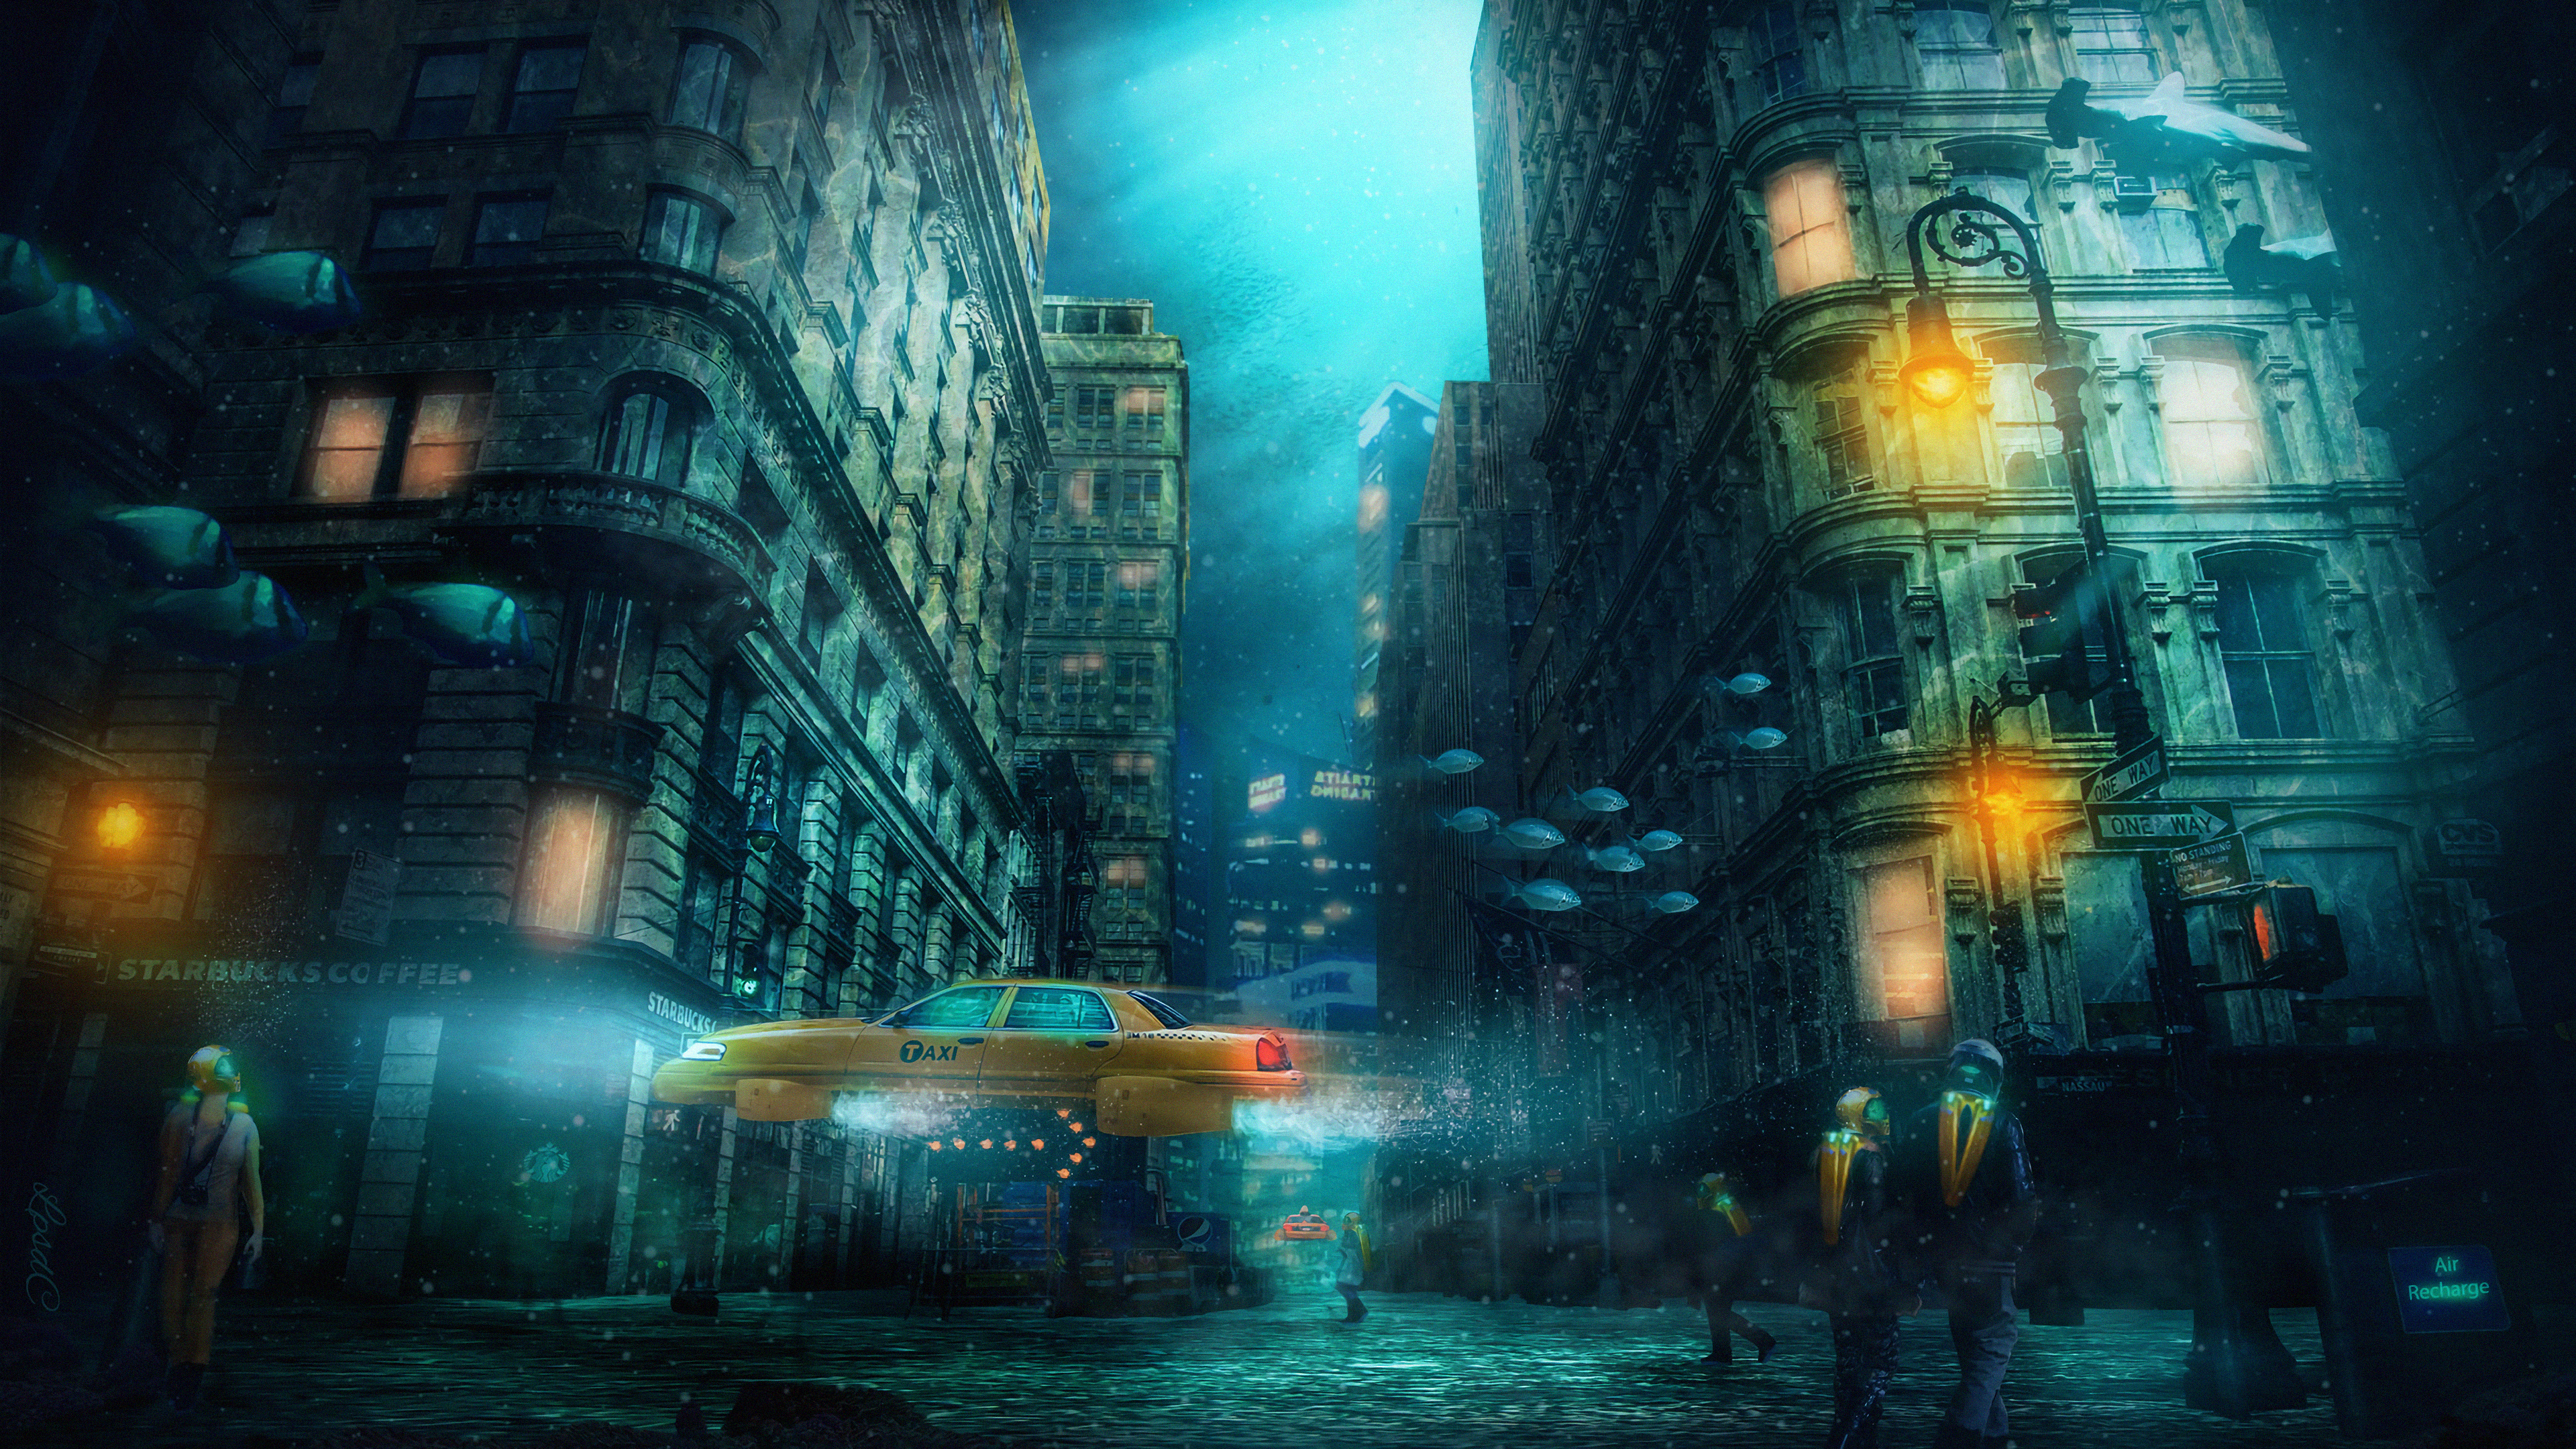 sci fi, city, building, taxi, underwater wallpaper for mobile